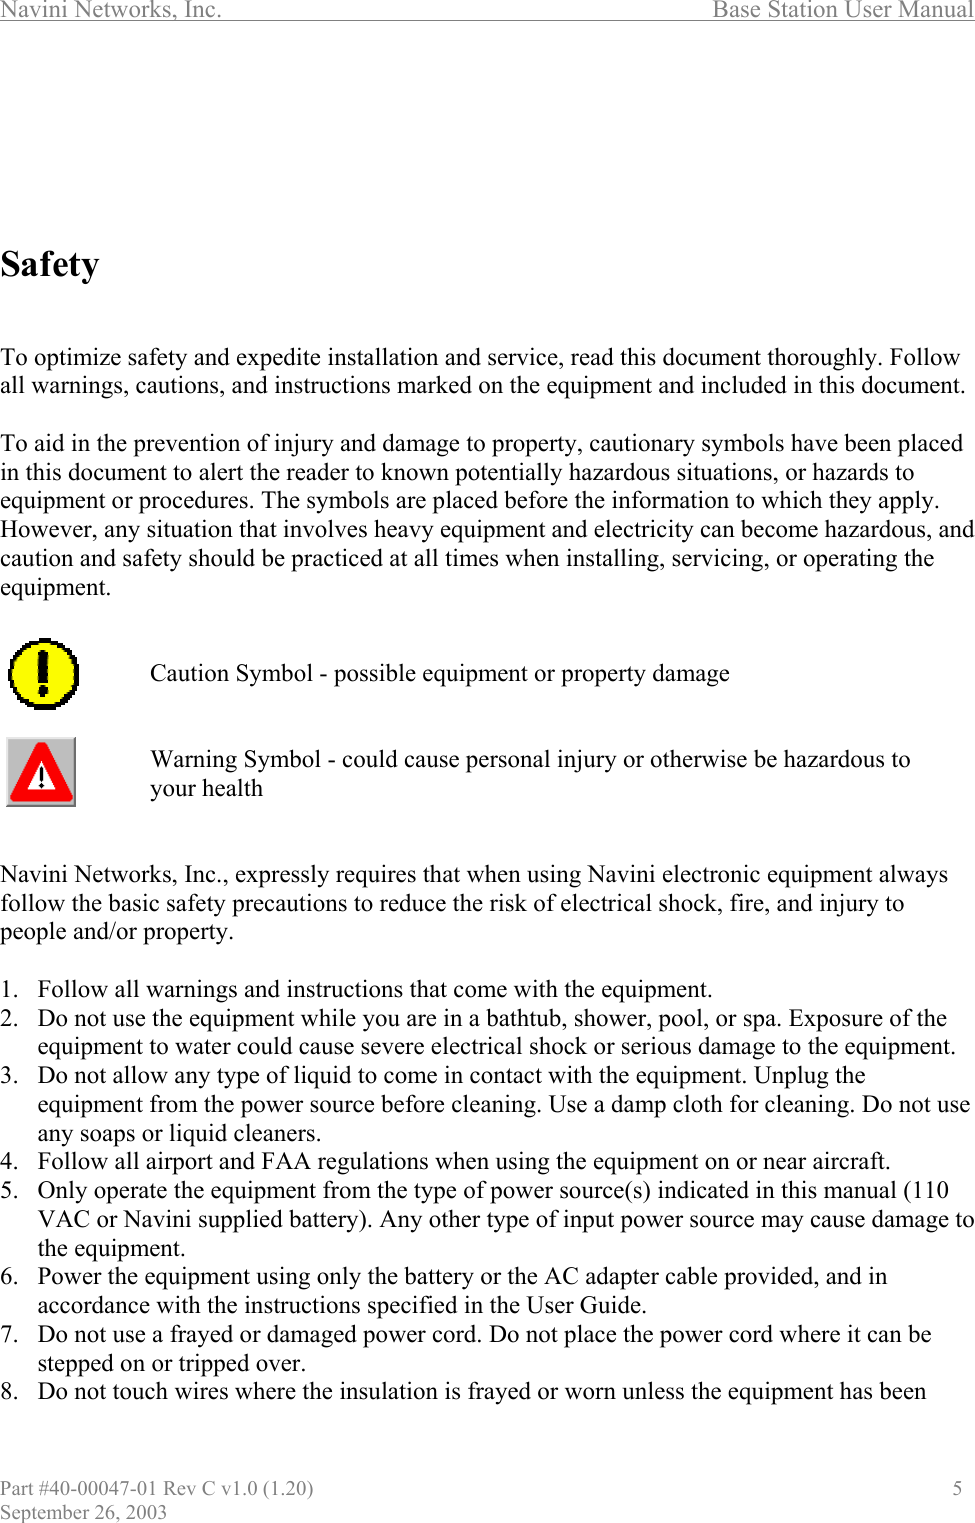 Navini Networks, Inc.                                  Base Station User Manual       Safety   To optimize safety and expedite installation and service, read this document thoroughly. Follow all warnings, cautions, and instructions marked on the equipment and included in this document.  To aid in the prevention of injury and damage to property, cautionary symbols have been placed in this document to alert the reader to known potentially hazardous situations, or hazards to equipment or procedures. The symbols are placed before the information to which they apply. However, any situation that involves heavy equipment and electricity can become hazardous, and caution and safety should be practiced at all times when installing, servicing, or operating the equipment.       Caution Symbol - possible equipment or property damage   Warning Symbol - could cause personal injury or otherwise be hazardous to  your health   Navini Networks, Inc., expressly requires that when using Navini electronic equipment always follow the basic safety precautions to reduce the risk of electrical shock, fire, and injury to people and/or property.  1.  Follow all warnings and instructions that come with the equipment. 2.  Do not use the equipment while you are in a bathtub, shower, pool, or spa. Exposure of the equipment to water could cause severe electrical shock or serious damage to the equipment. 3.  Do not allow any type of liquid to come in contact with the equipment. Unplug the equipment from the power source before cleaning. Use a damp cloth for cleaning. Do not use any soaps or liquid cleaners. 4.  Follow all airport and FAA regulations when using the equipment on or near aircraft. 5.  Only operate the equipment from the type of power source(s) indicated in this manual (110 VAC or Navini supplied battery). Any other type of input power source may cause damage to the equipment. 6.  Power the equipment using only the battery or the AC adapter cable provided, and in accordance with the instructions specified in the User Guide. 7.  Do not use a frayed or damaged power cord. Do not place the power cord where it can be stepped on or tripped over. 8.  Do not touch wires where the insulation is frayed or worn unless the equipment has been Part #40-00047-01 Rev C v1.0 (1.20)                               5 September 26, 2003 